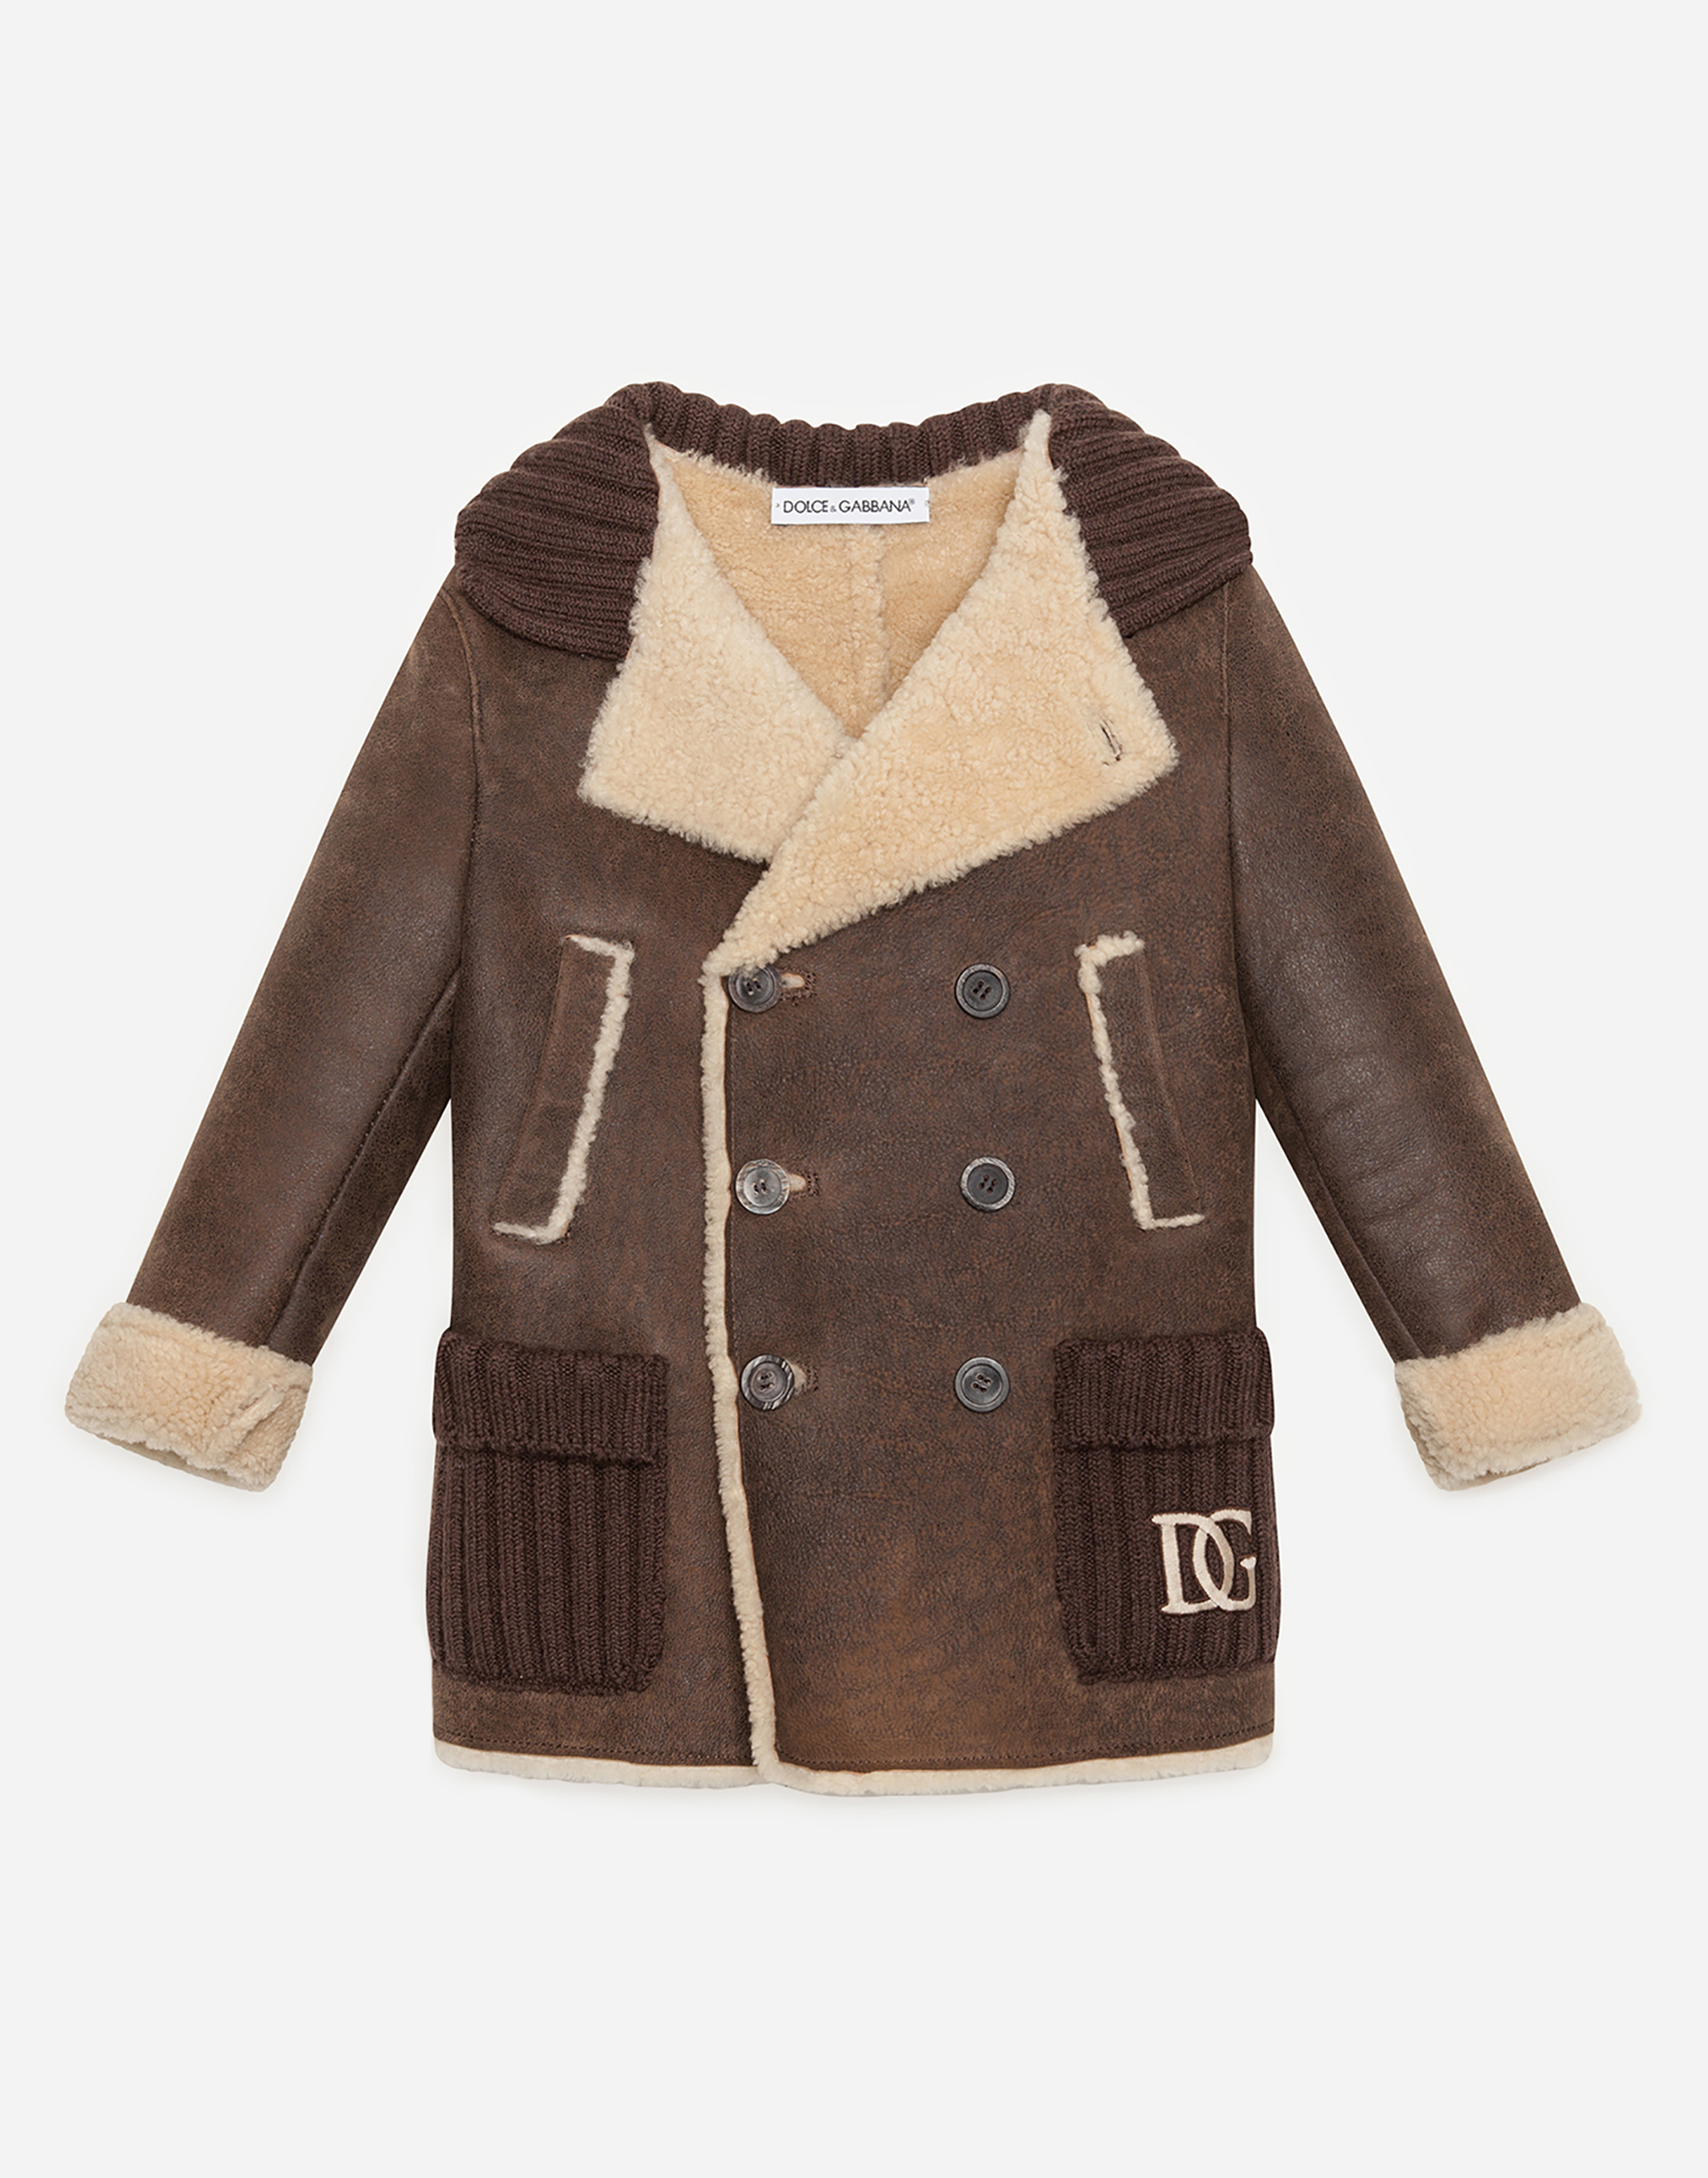 DOLCE & GABBANA Double-breasted shearling coat with knit inserts